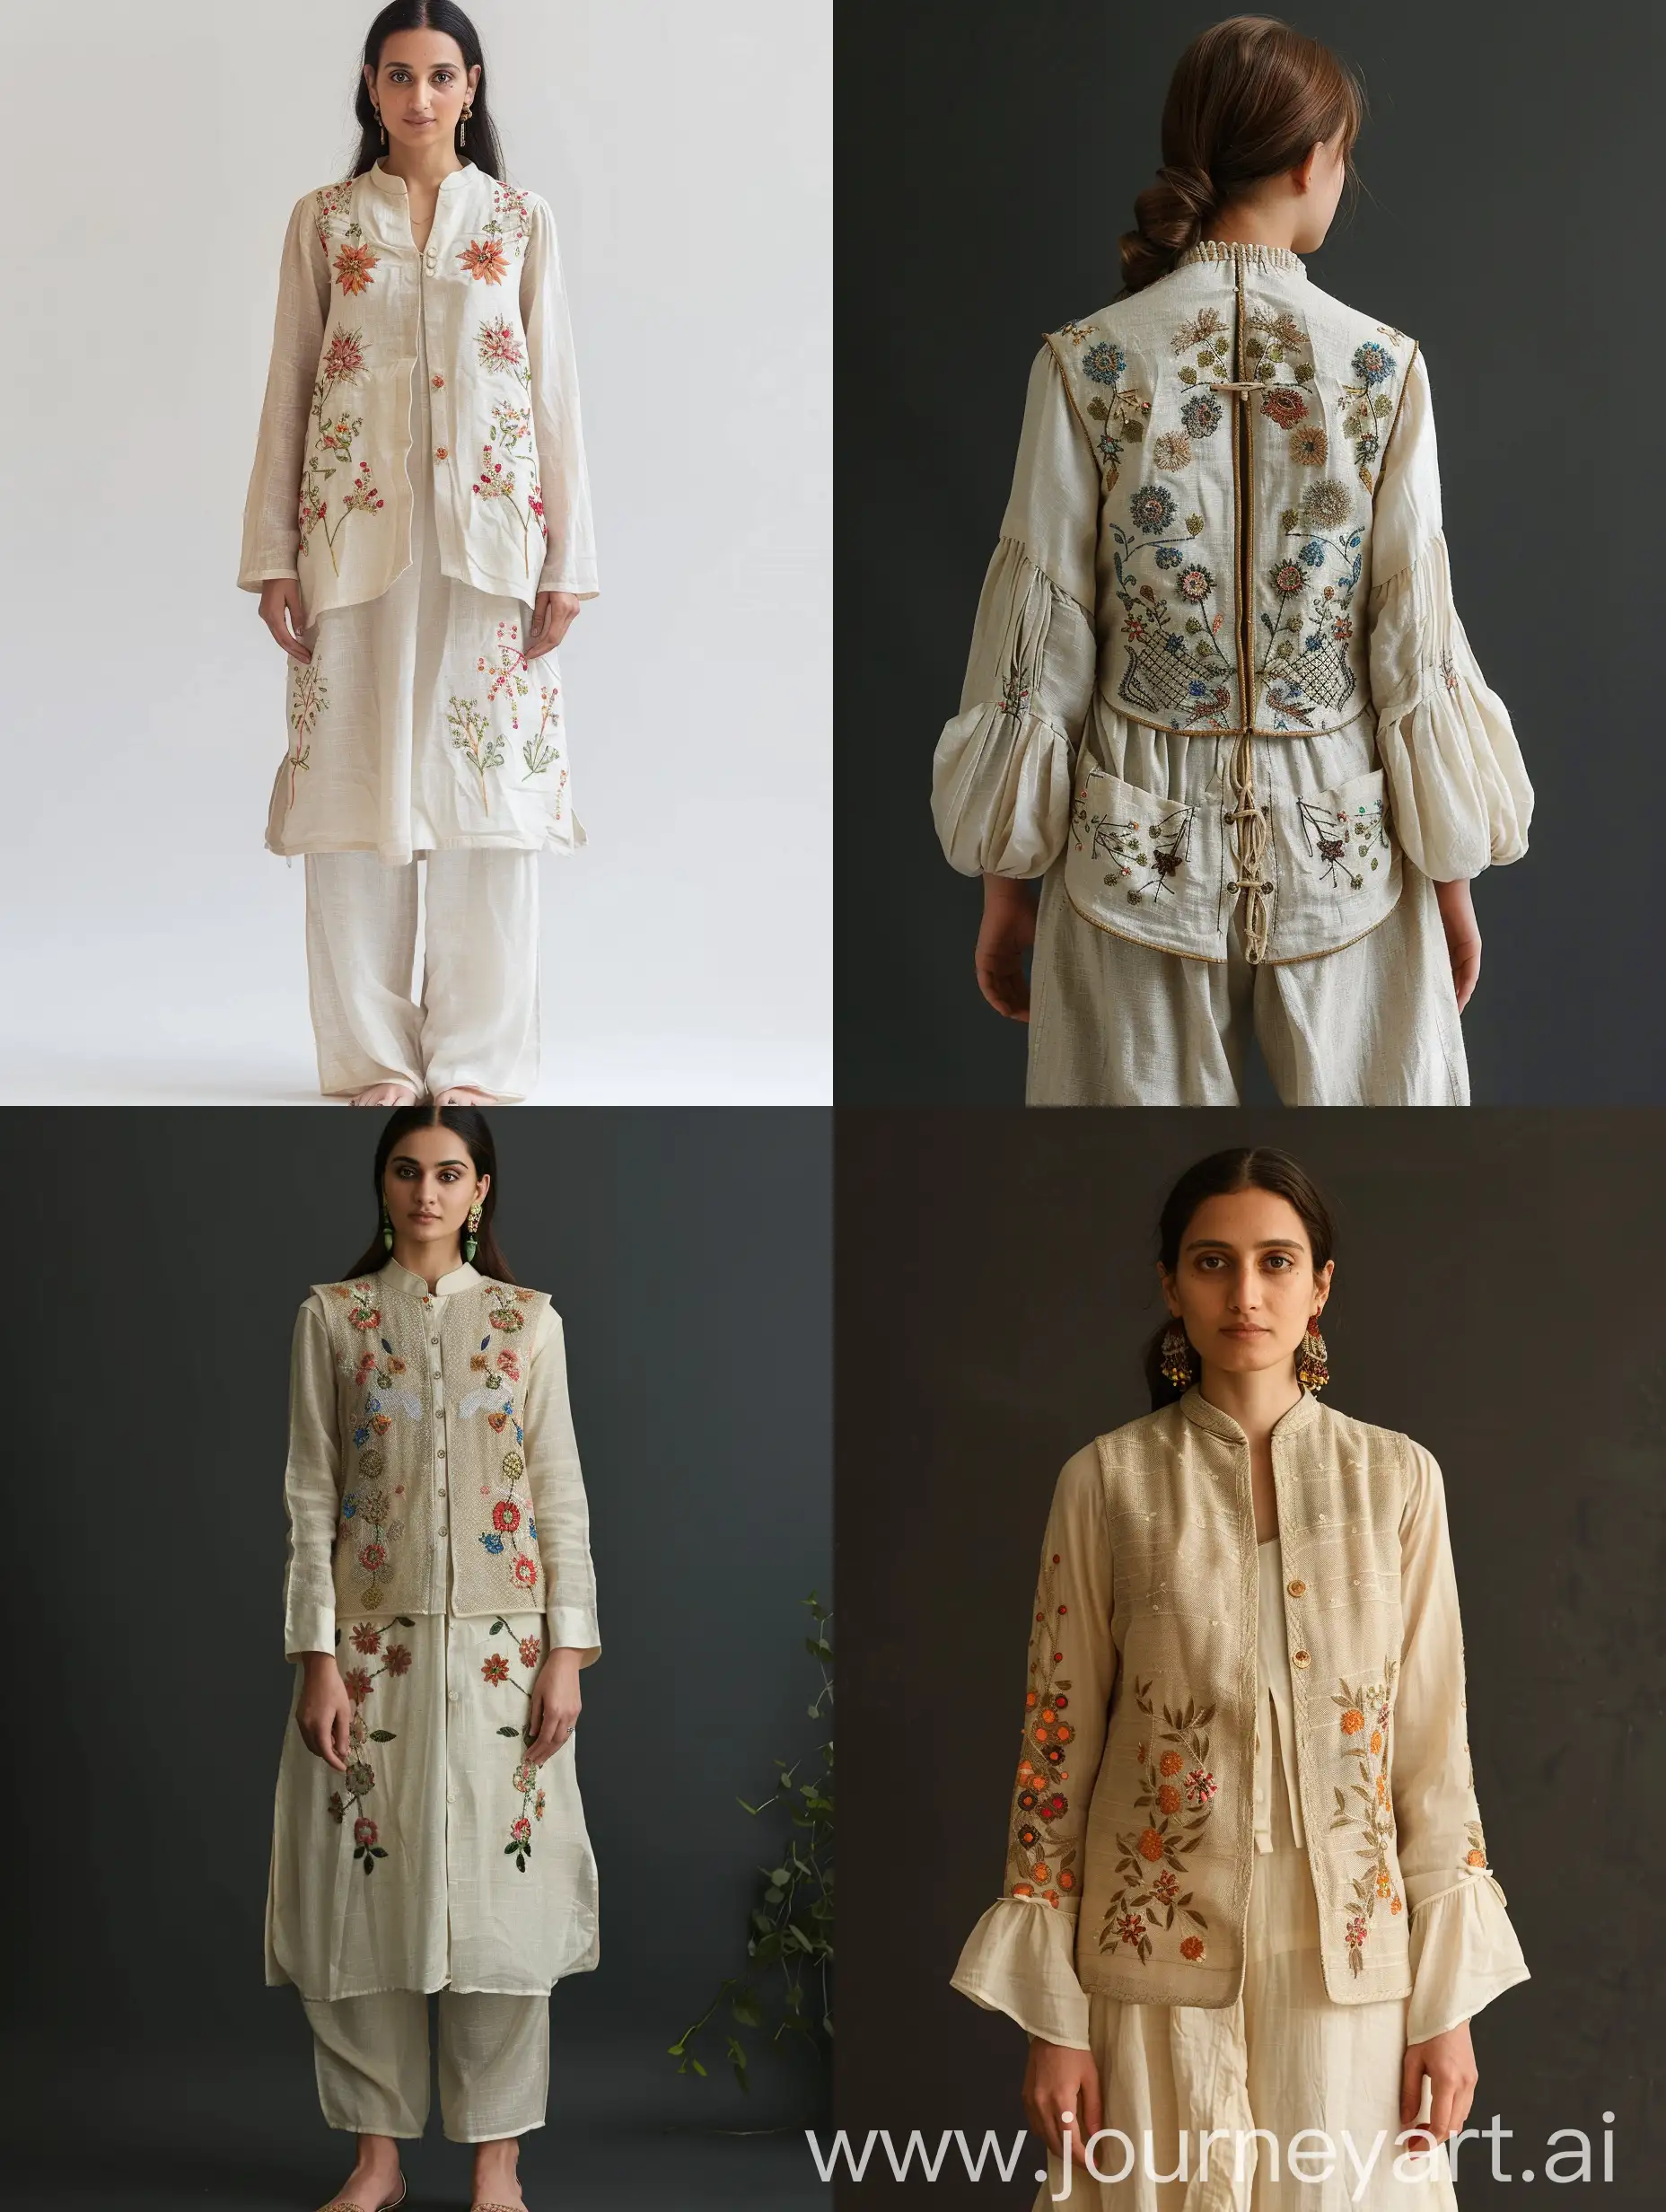 Women's vest and blouse and pants, cream background color, linen material, fine and small embroidery on the vest, outstanding embroidery and hand art, long sleeve blouse